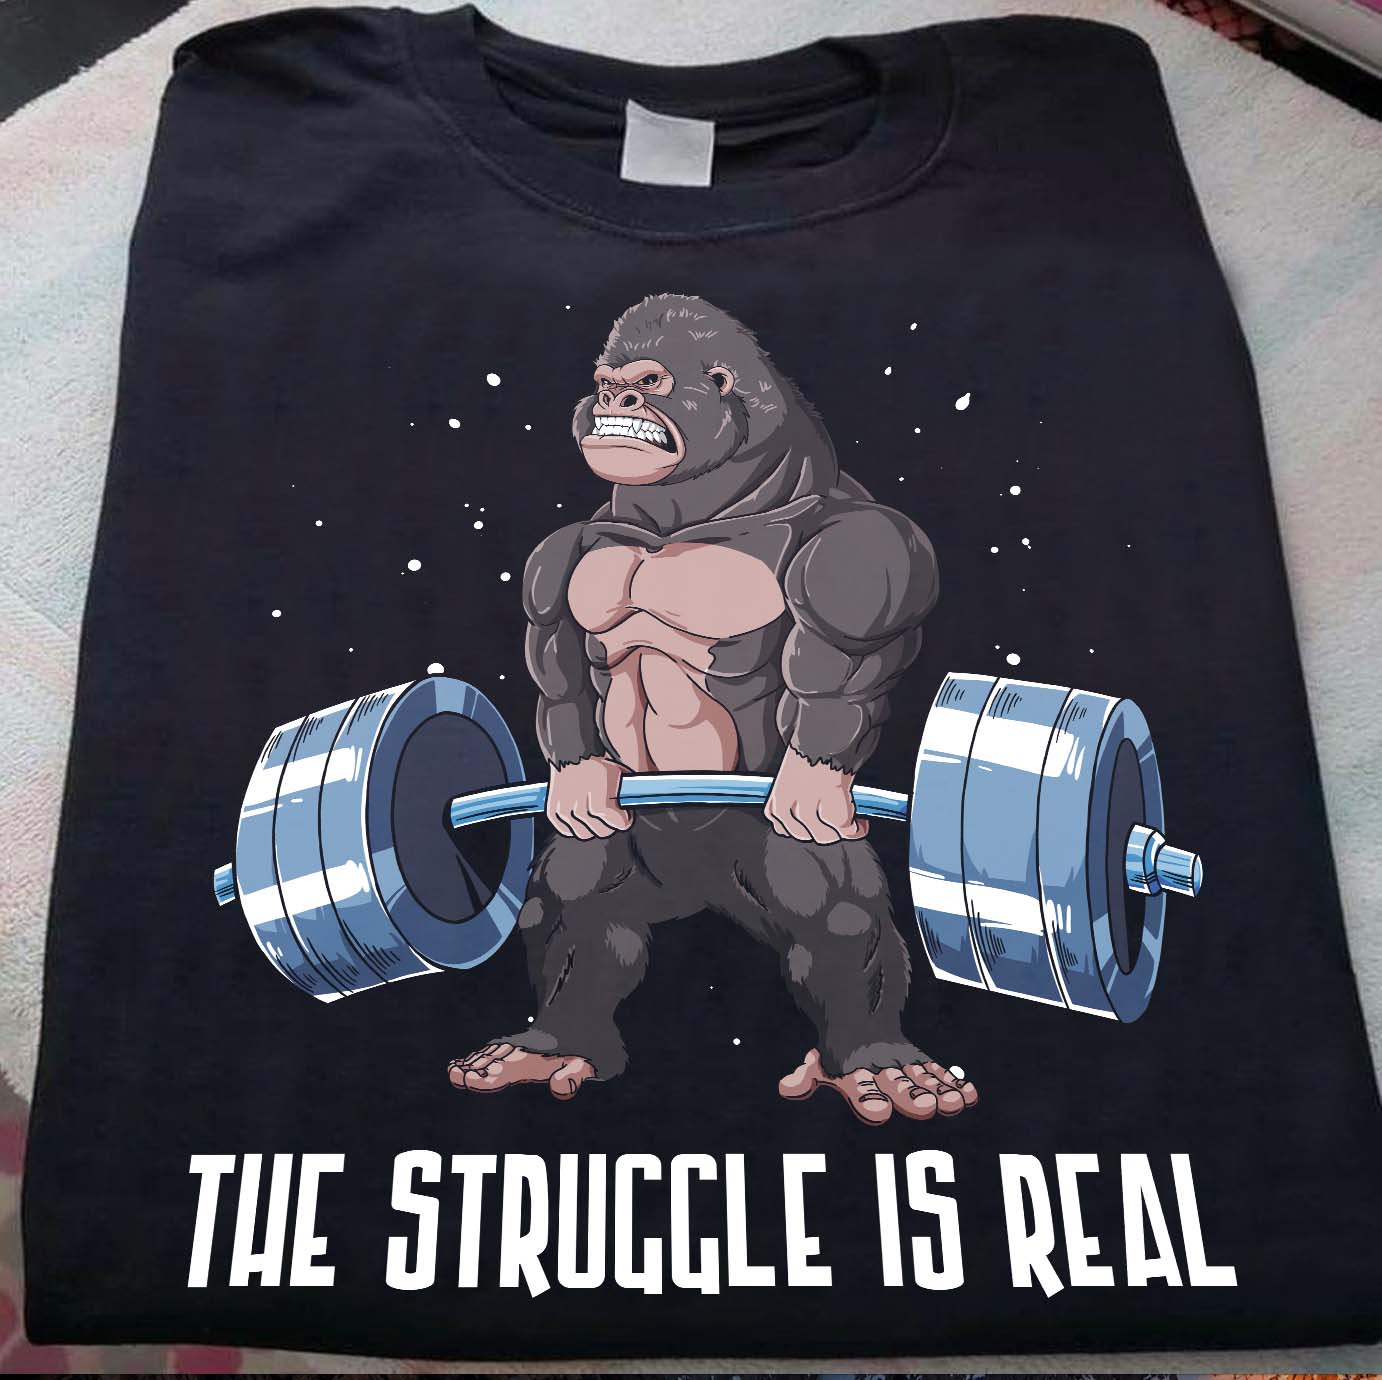 The struggle is real - Gorilla deadlifting, lifting lover